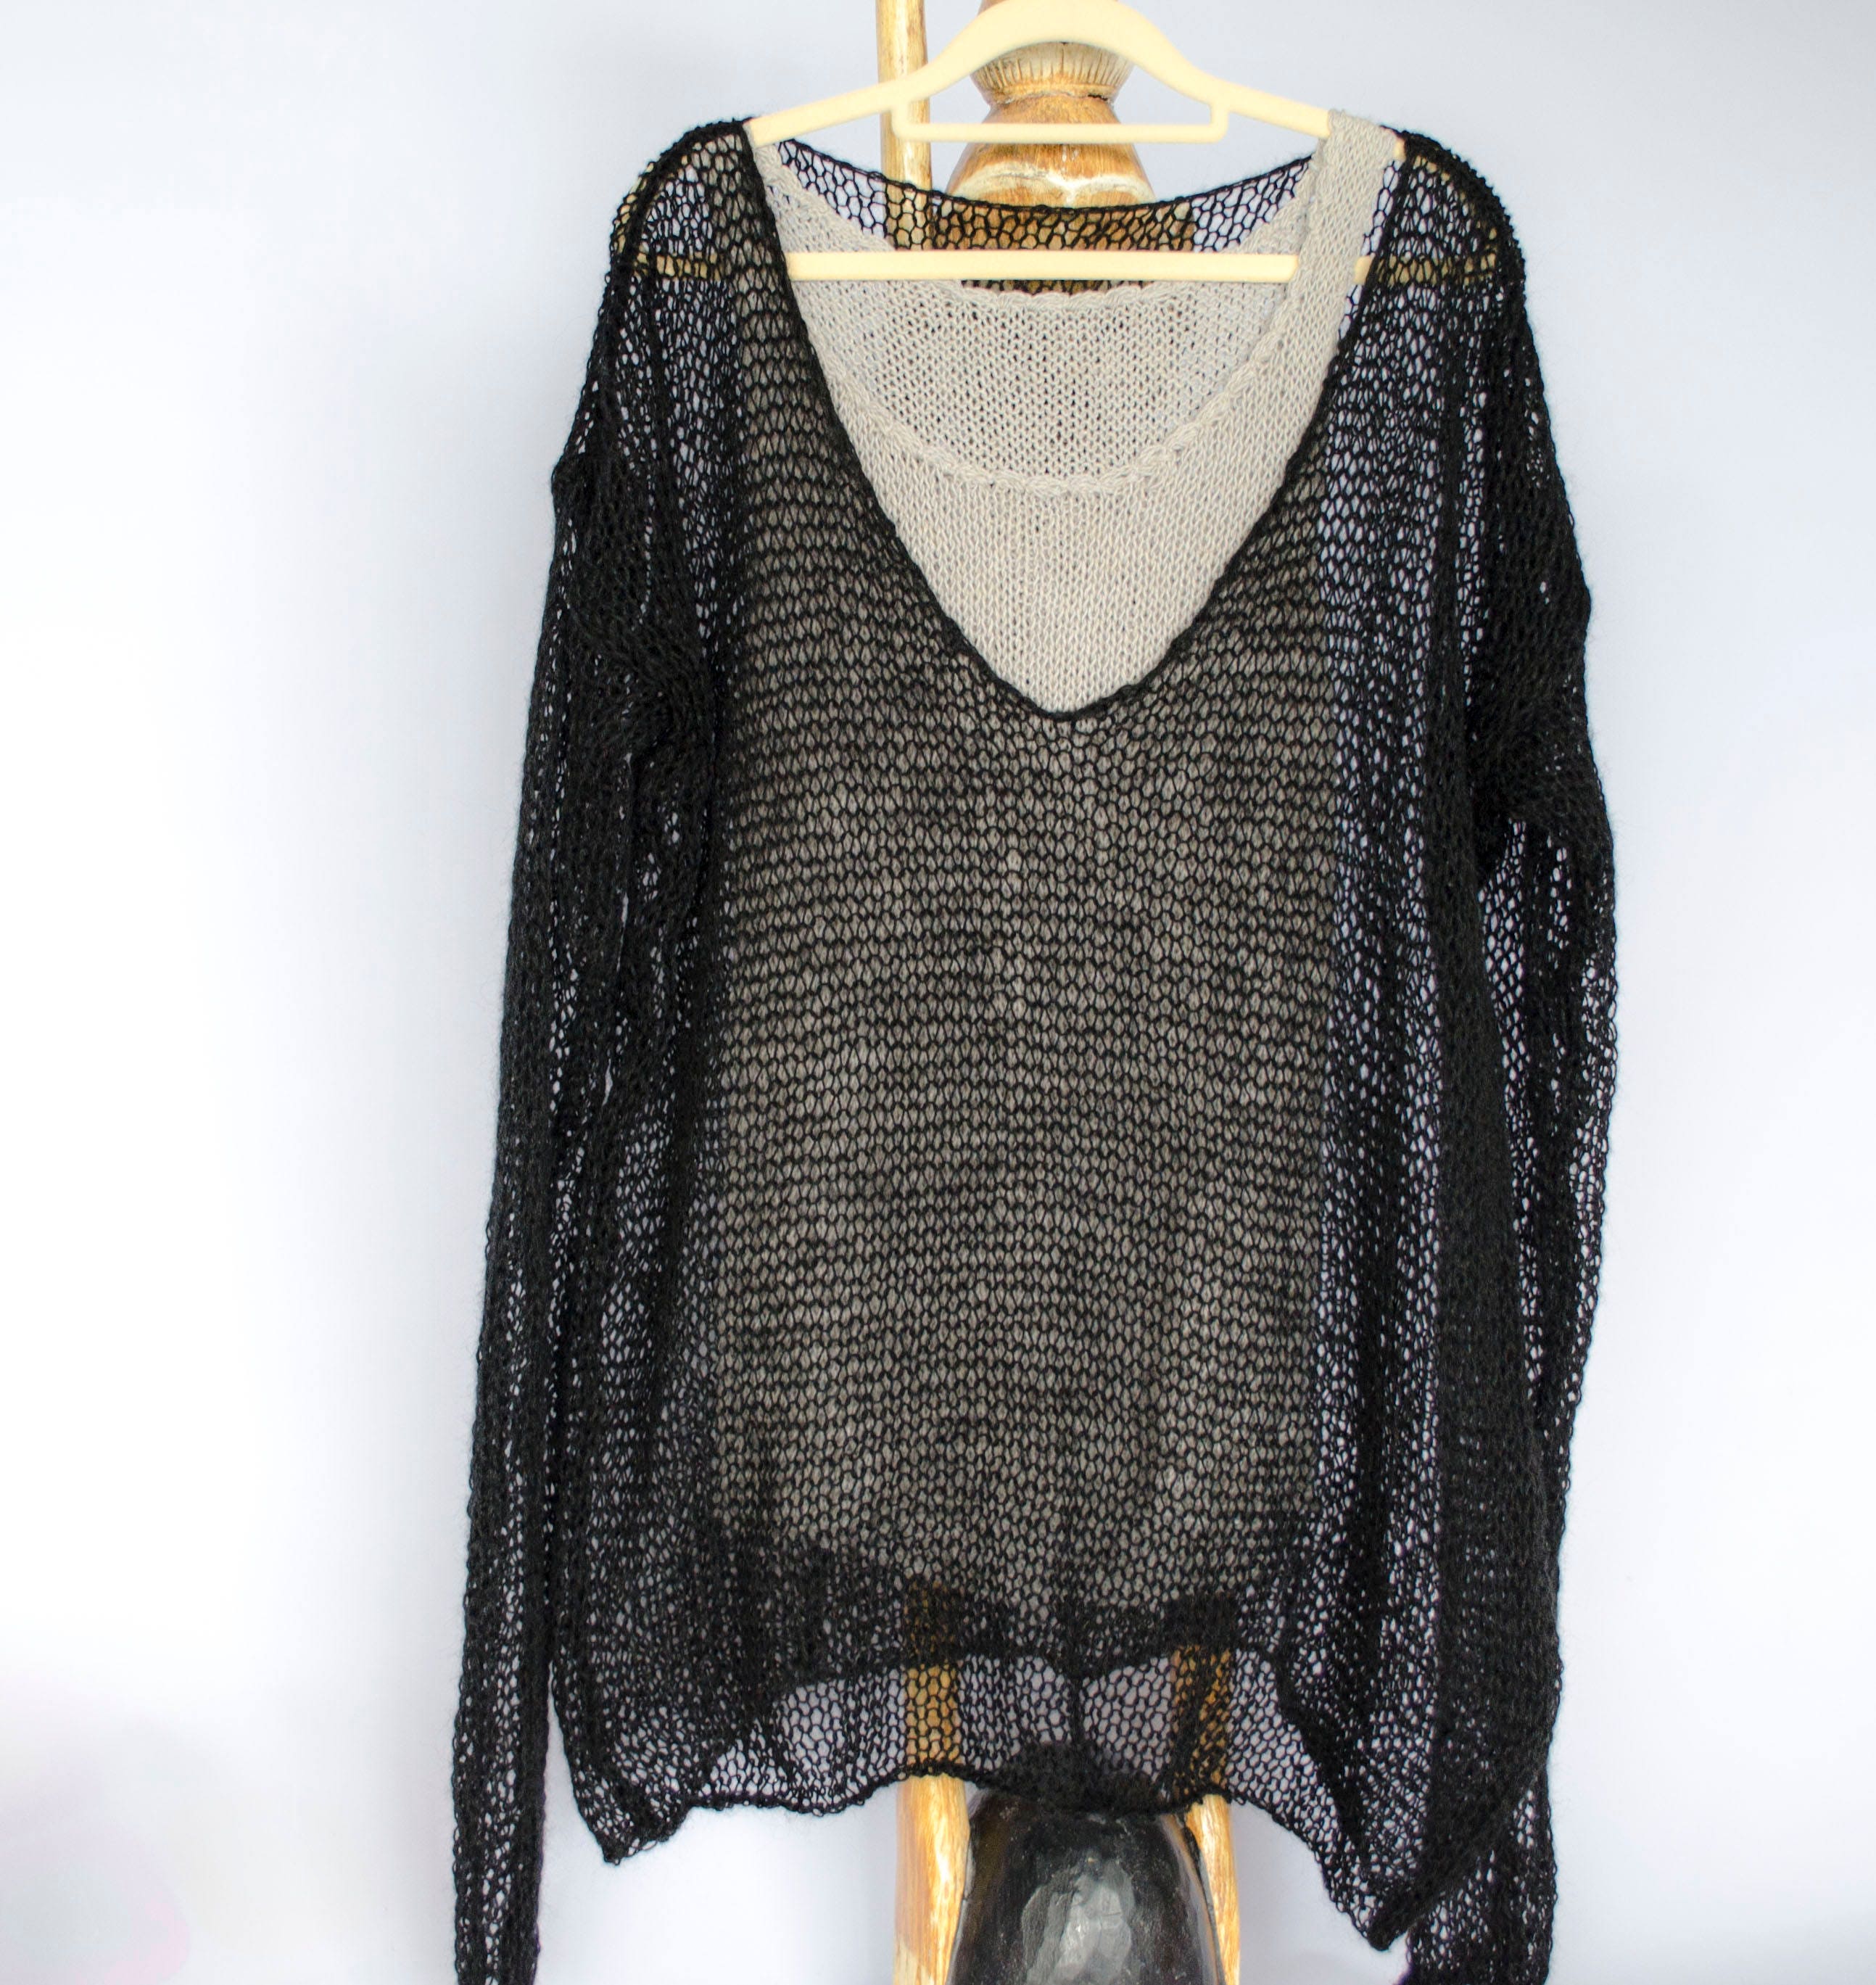 Mohair Sweater, Black Deep V Neck Mesh Knit Outfit, Unisex See 